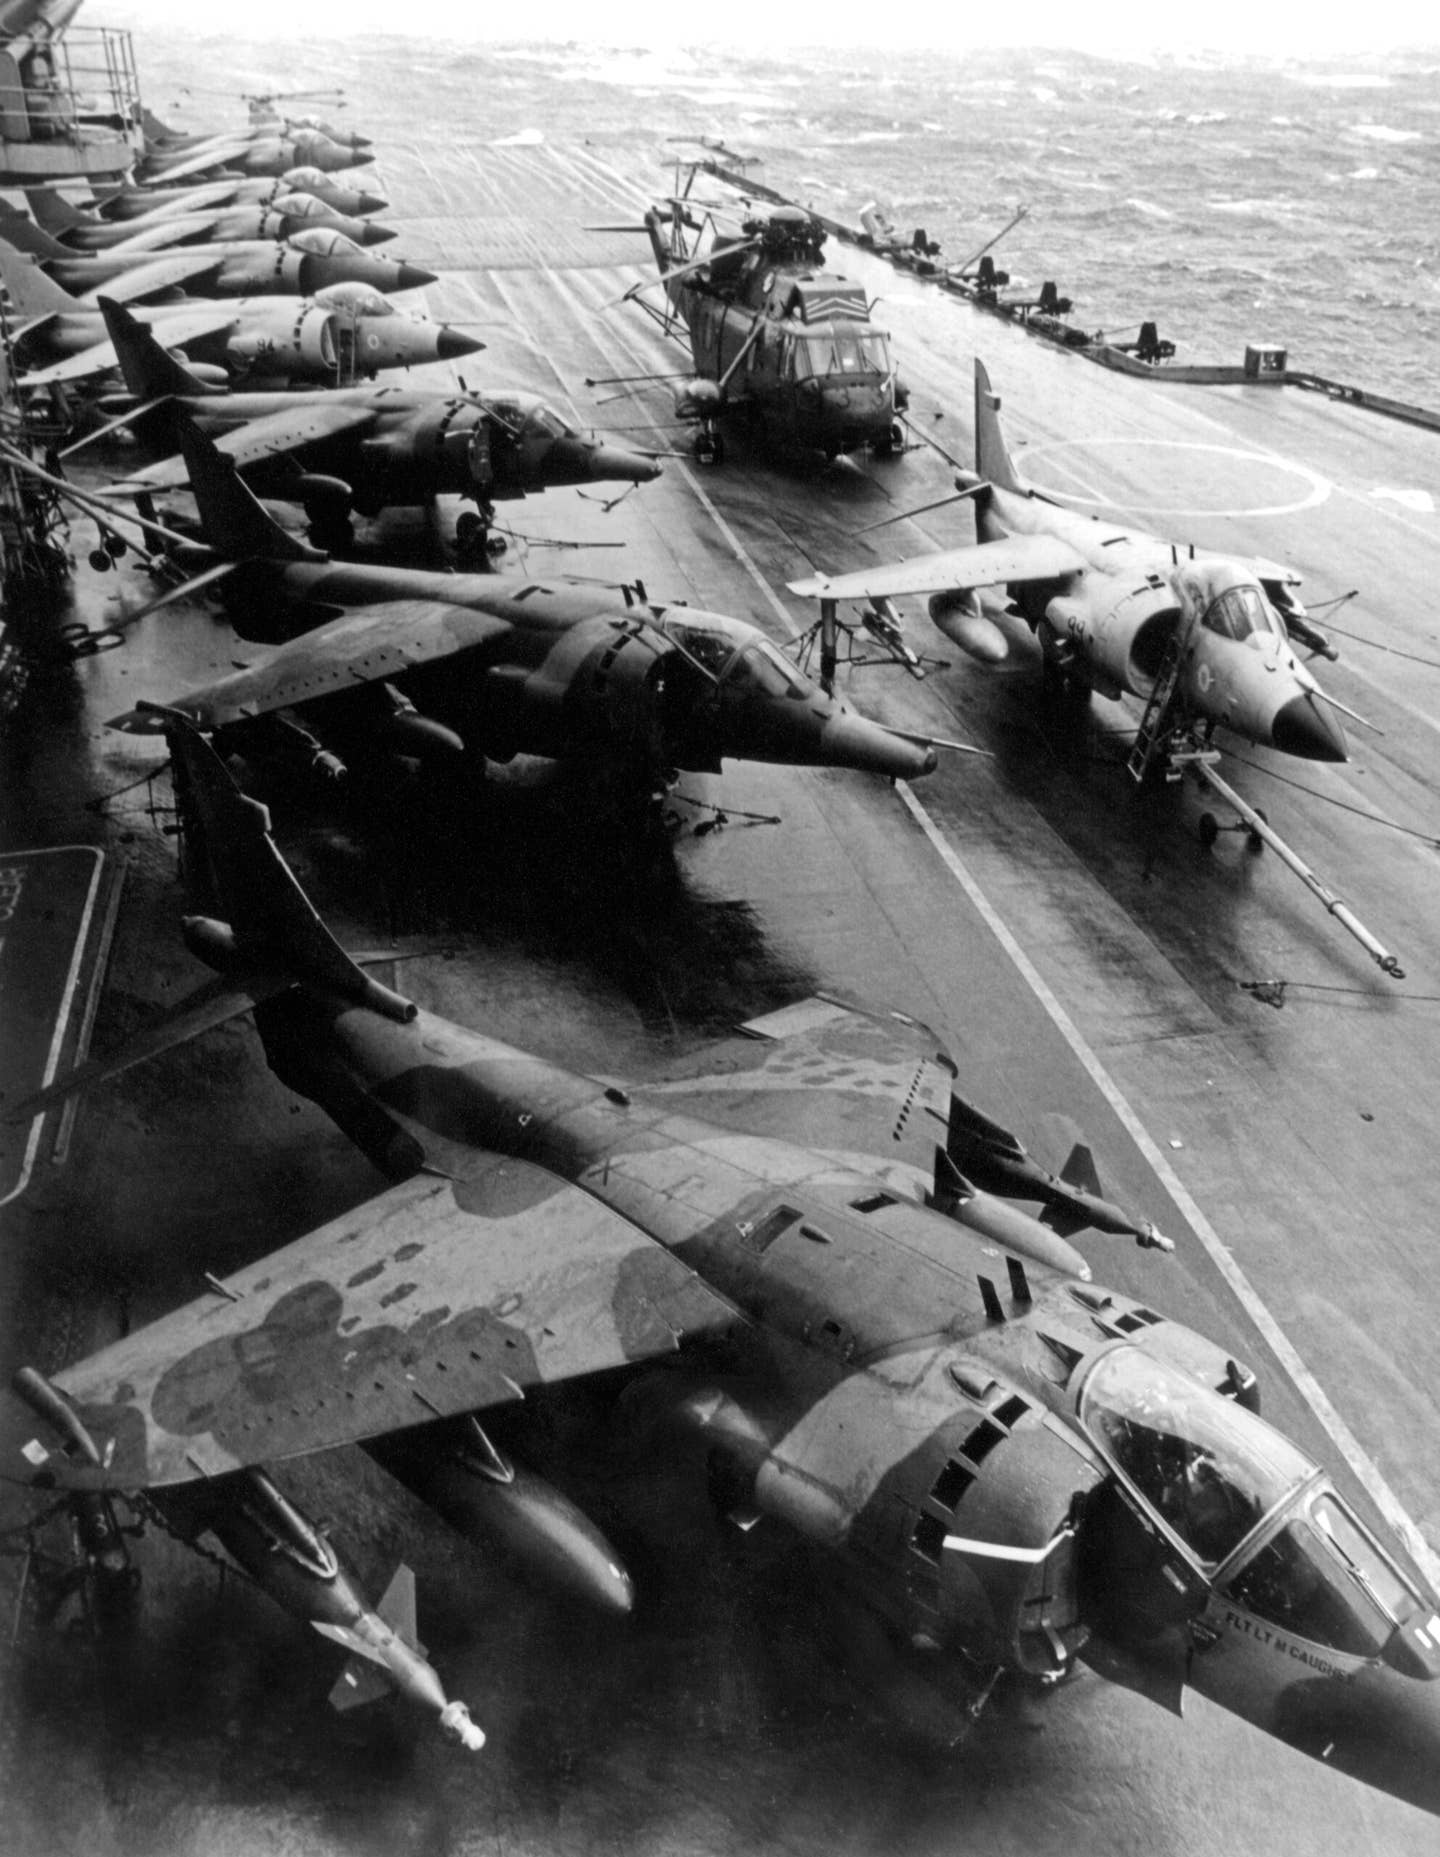 Royal Air Force Harrier GR3s (nearest the camera) alongside Royal Navy Sea Harriers and a Sea King helicopter on the flight deck of HMS <em>Hermes</em> on May 19, 1982, during the Falklands campaign in the South Atlantic. <em>Crown Copyright</em>